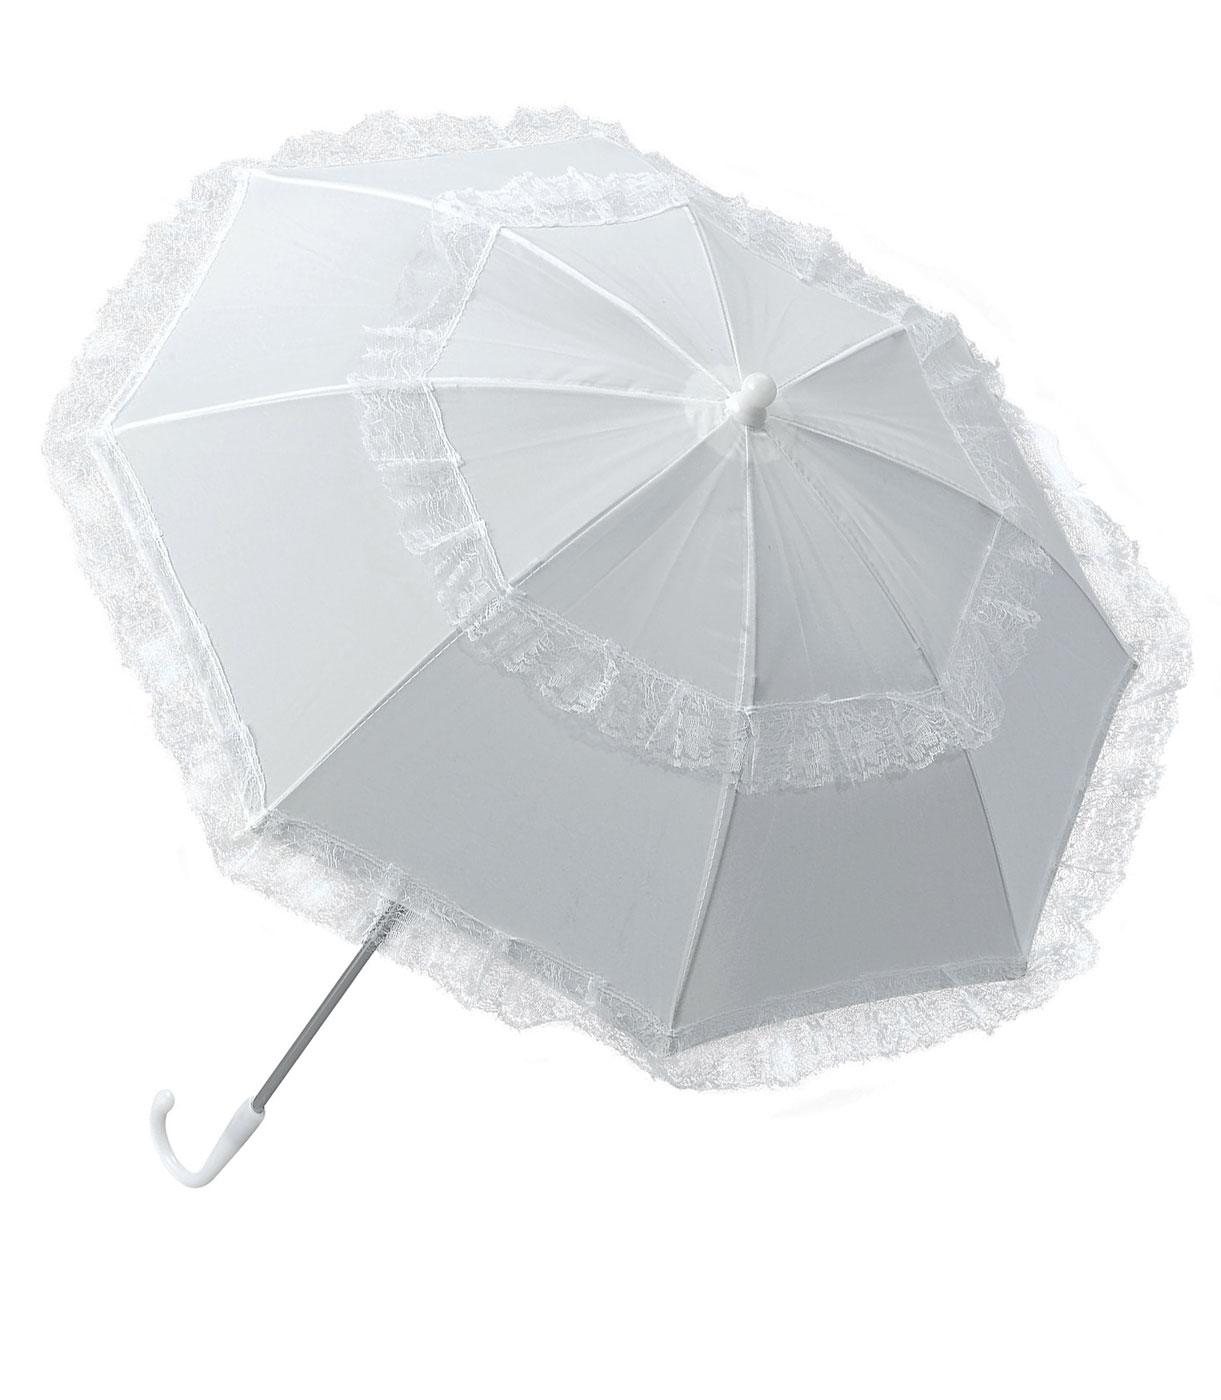 Lady's White Parasol Costume Accessory by Bristiol Novelties BA774 available here at Karnival Costumes online party shop